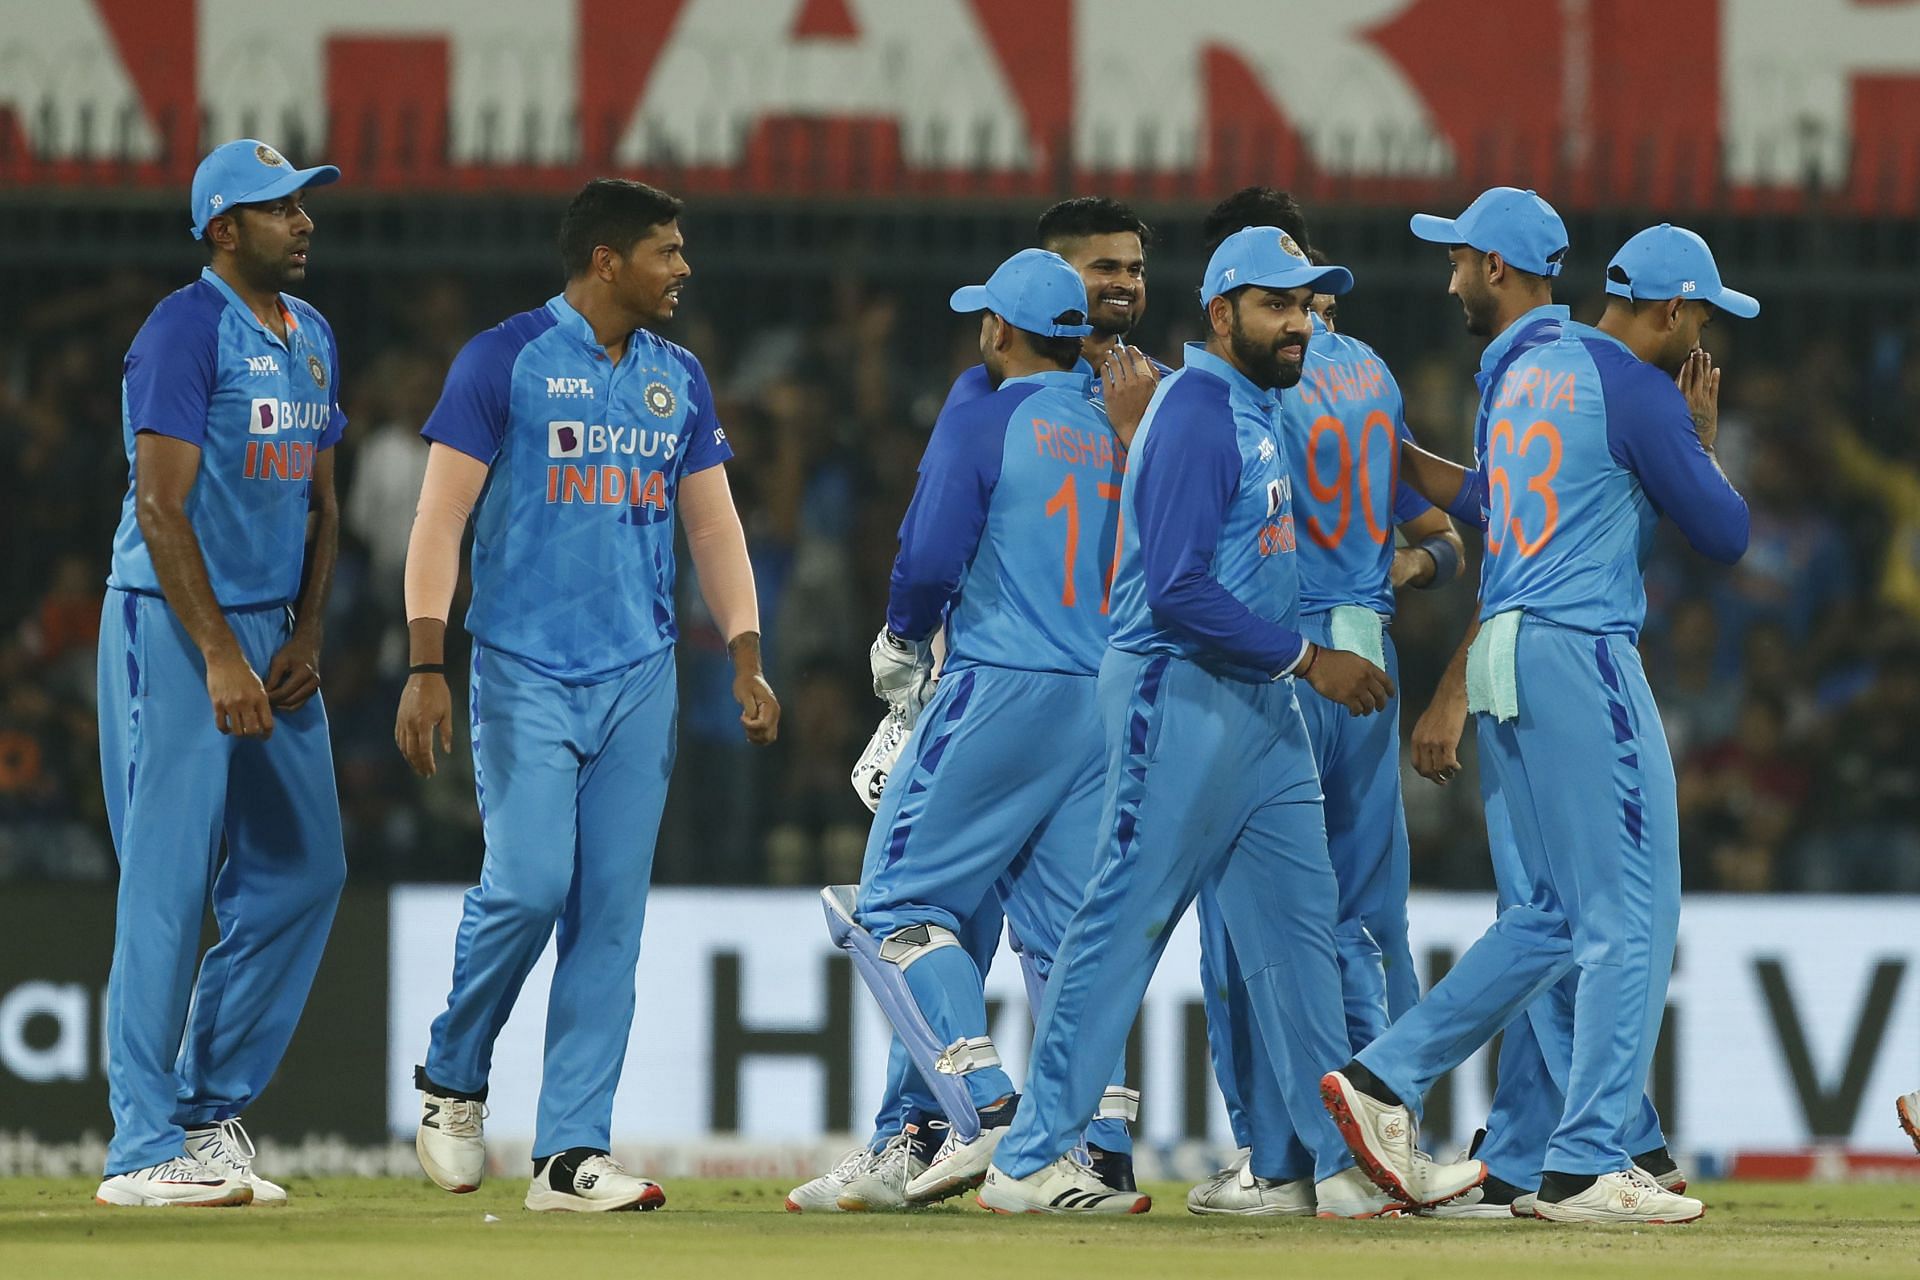 3rd T20 International: India v South Africa